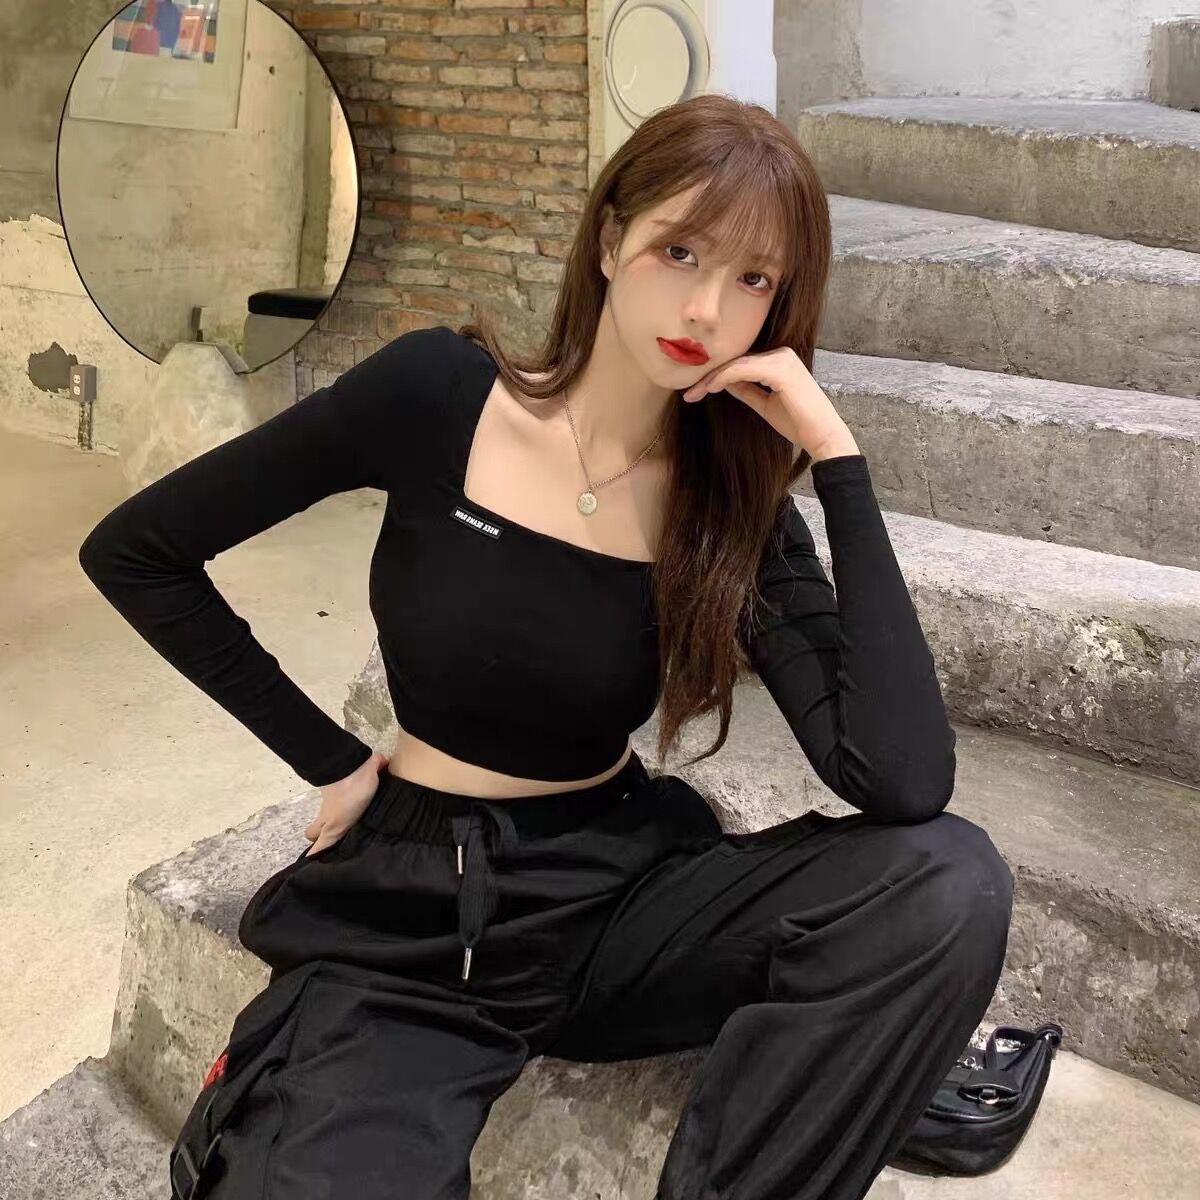 Early spring square collar exposed clavicle top women's design sense short section exposed navel long-sleeved t-shirt autumn and winter tight inner bottoming shirt